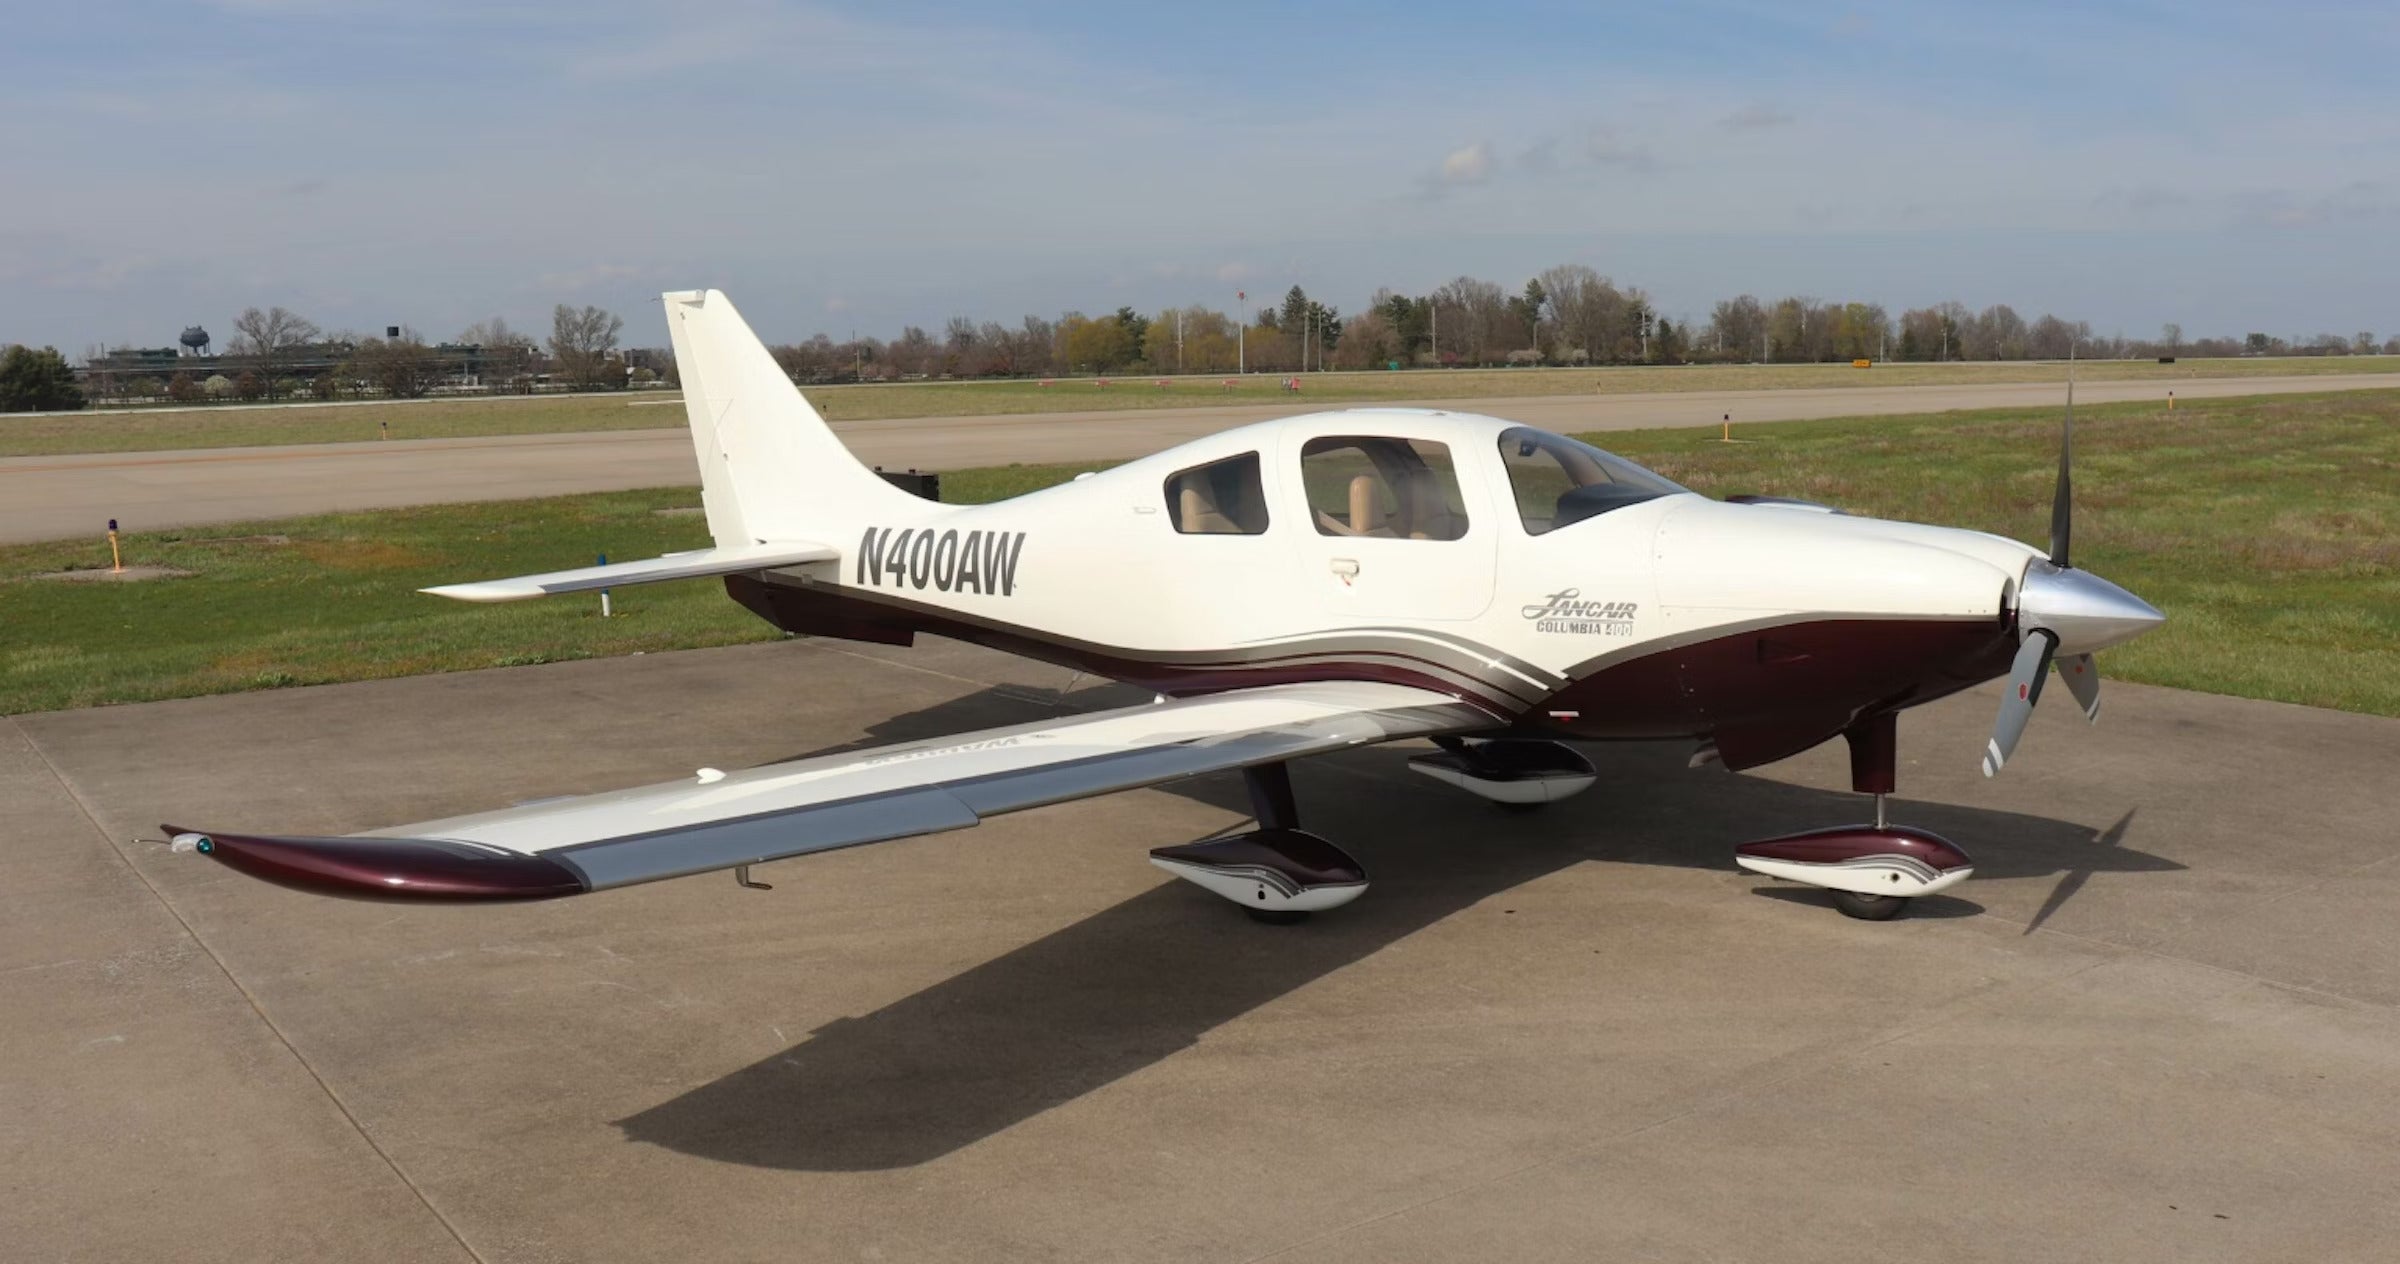 This 2004 Lancair Columbia 400 Is an Innovative ‘AircraftForSale’ Top Pick